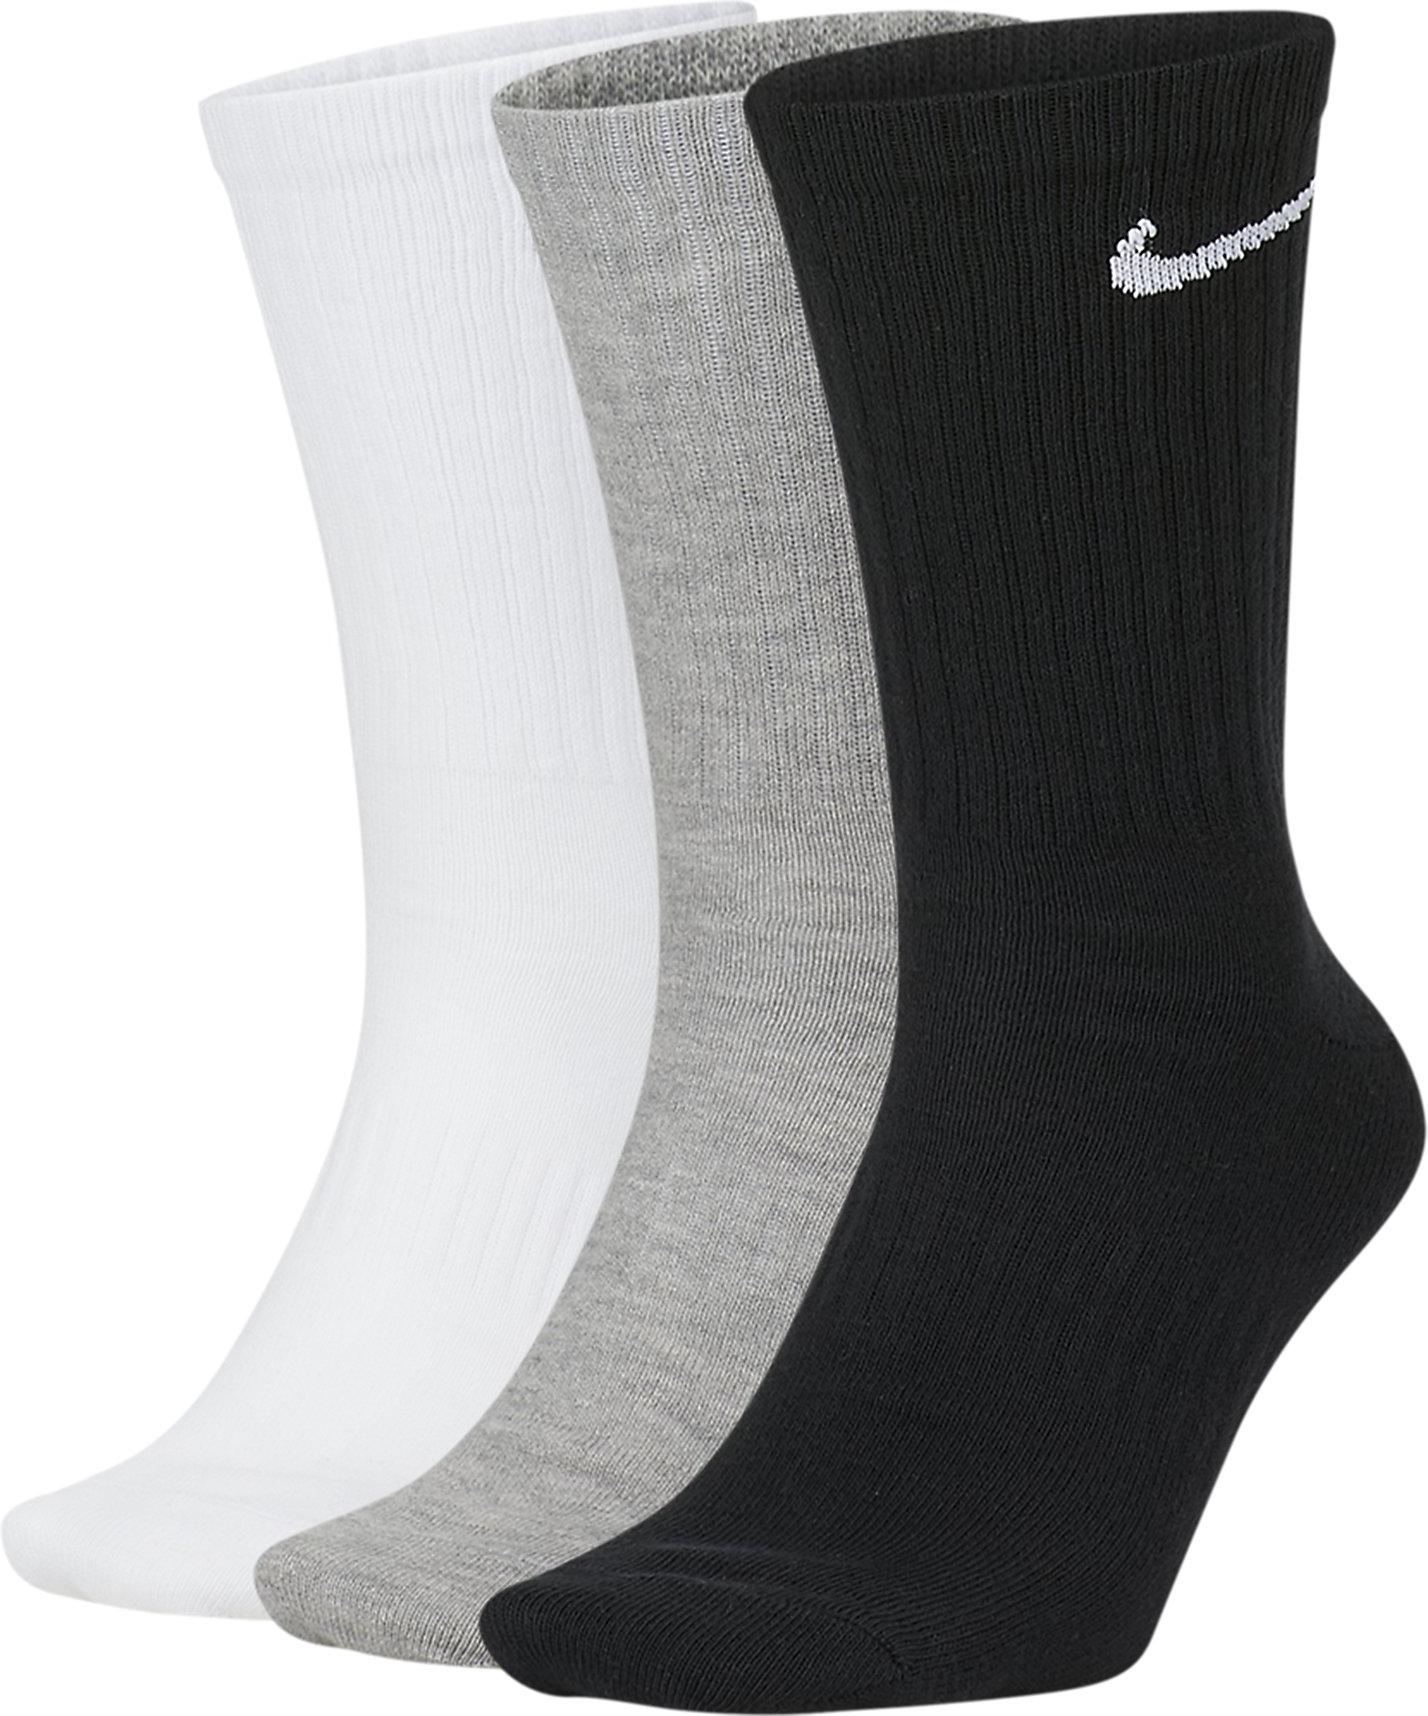 Calcetines Nike Everyday 3 pack